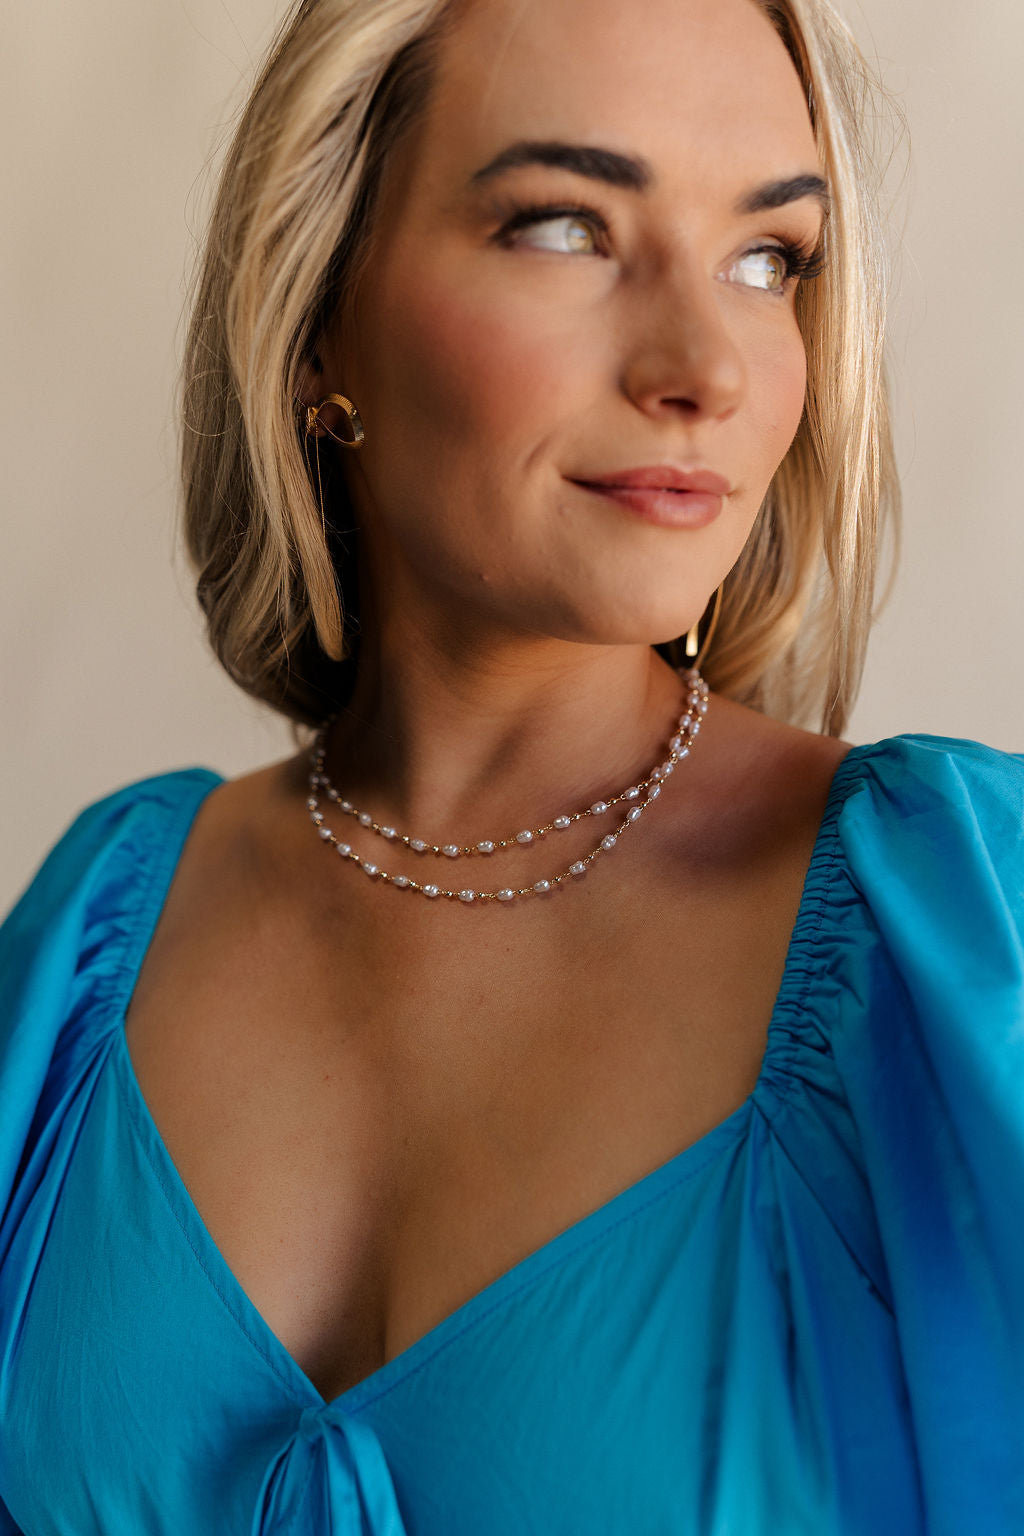 Close up front view of female model wearing the Emma Pearl & Gold Double Layer Necklace which features pearl and gold beads linked together in two layers and adjustable clasp closure.